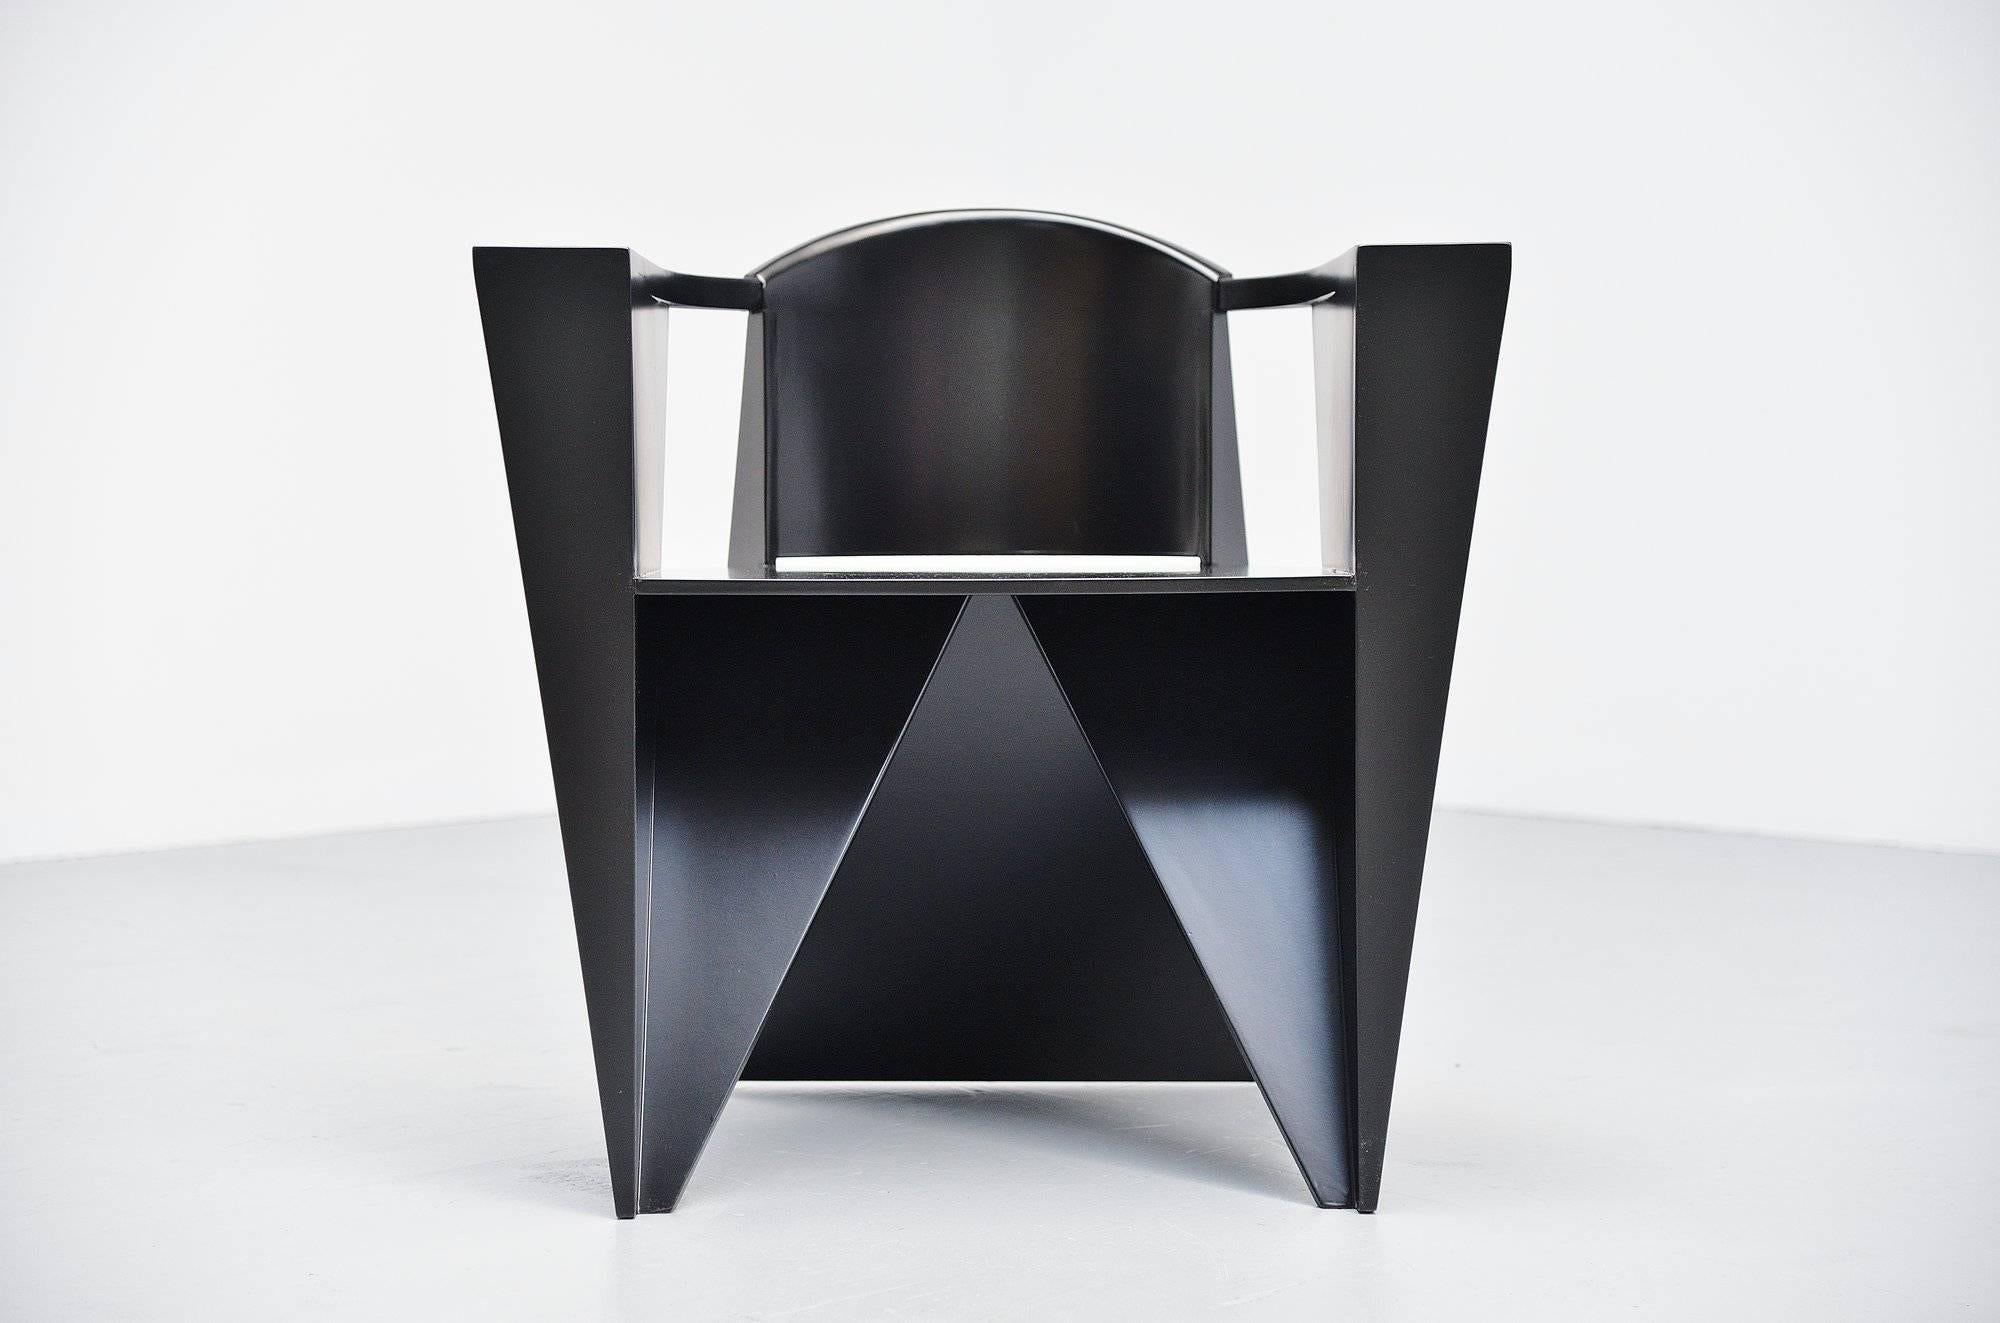 Fantastic shaped Postmodern armchair designed by Adriano & Paolo Suman, manufactured by Giorgetti Spa, Italy 1984. This chair is from the Matrix series designed in 1984. Very nice constructivist chairs made of beech plywood, black lacquered. Very